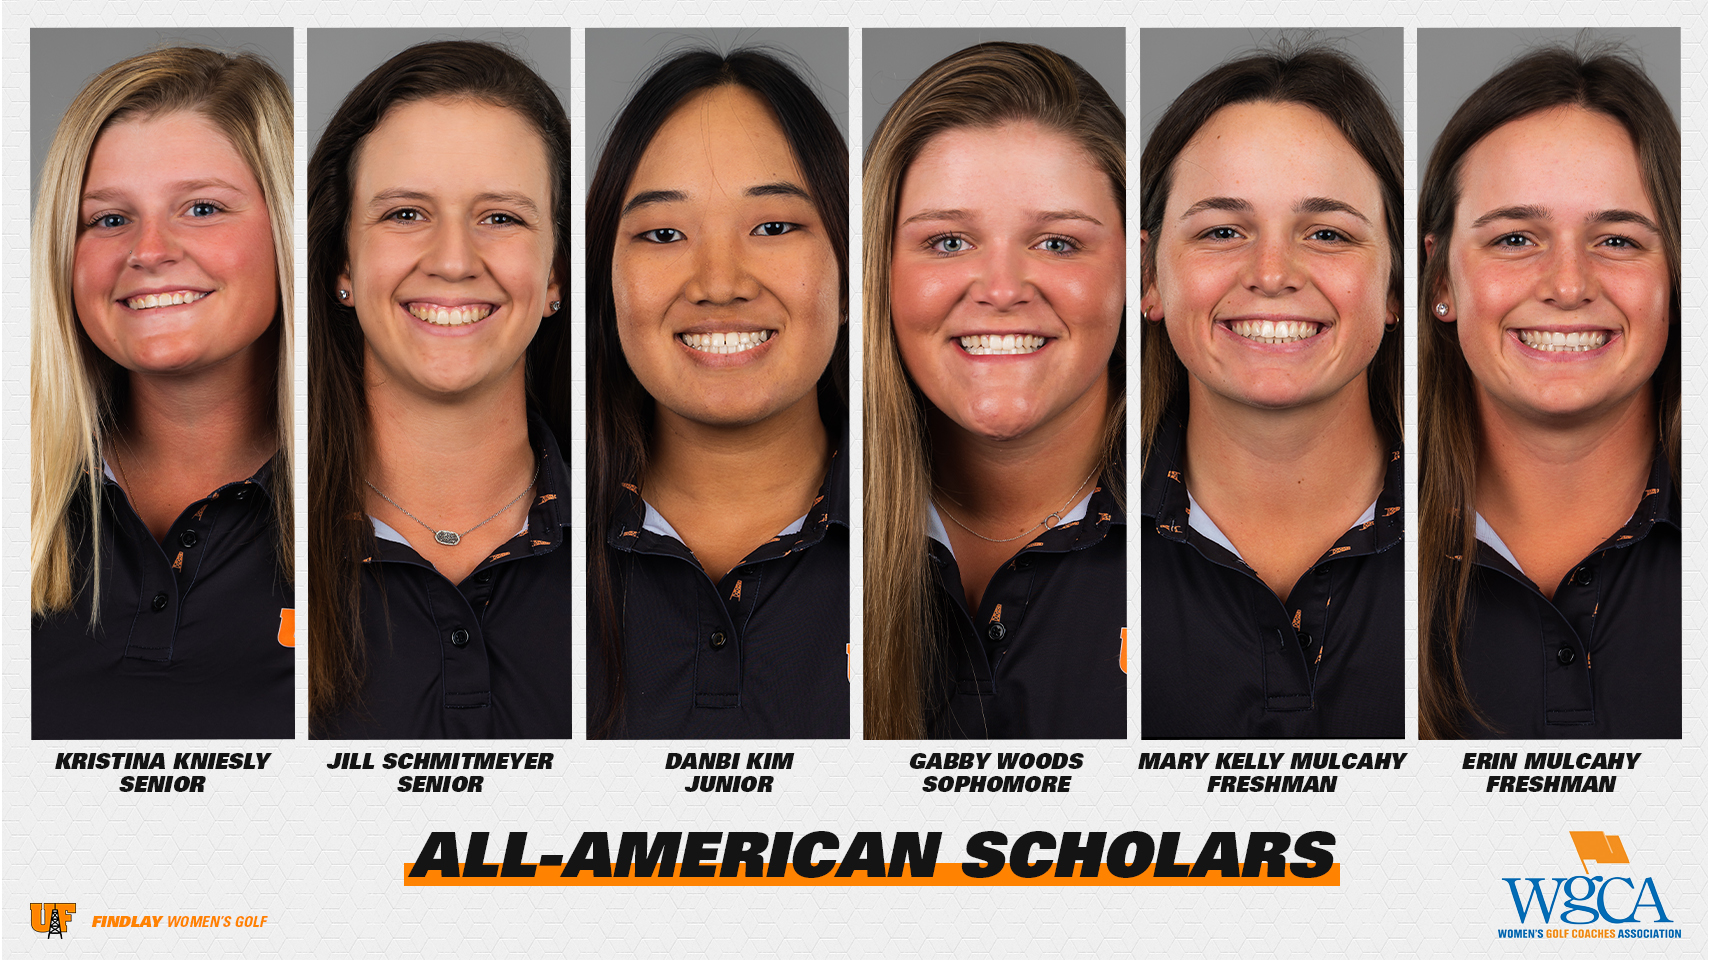 Graphic of all-American scholars.